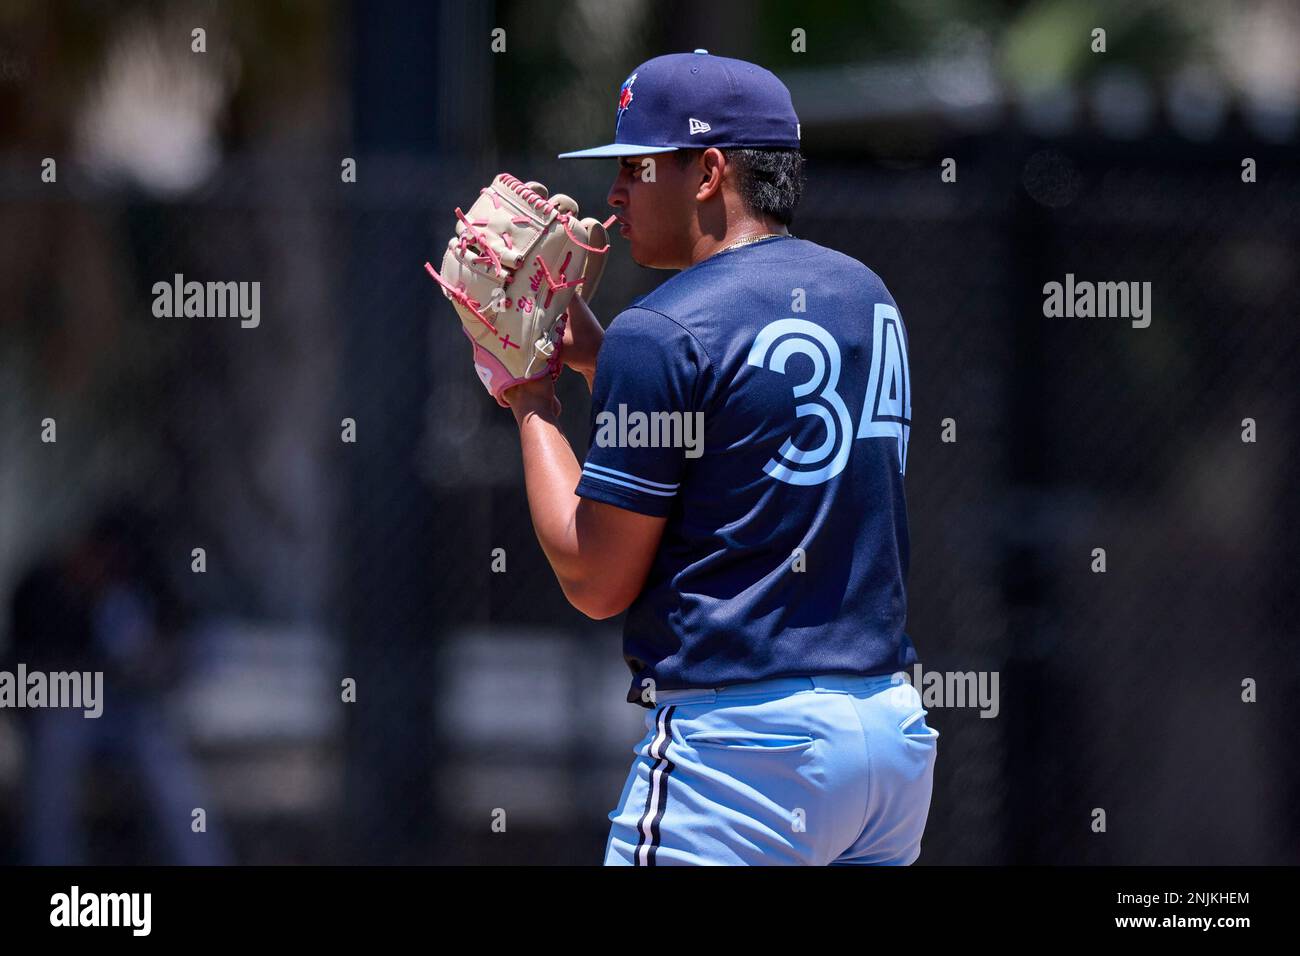 FCL Blue Jays pitcher Eliander Alcalde (34) during a Florida Complex League  baseball game against the FCL Yankees on August 4, 2022 at the Blue Jays  Player Development Complex in Dunedin, Florida. (